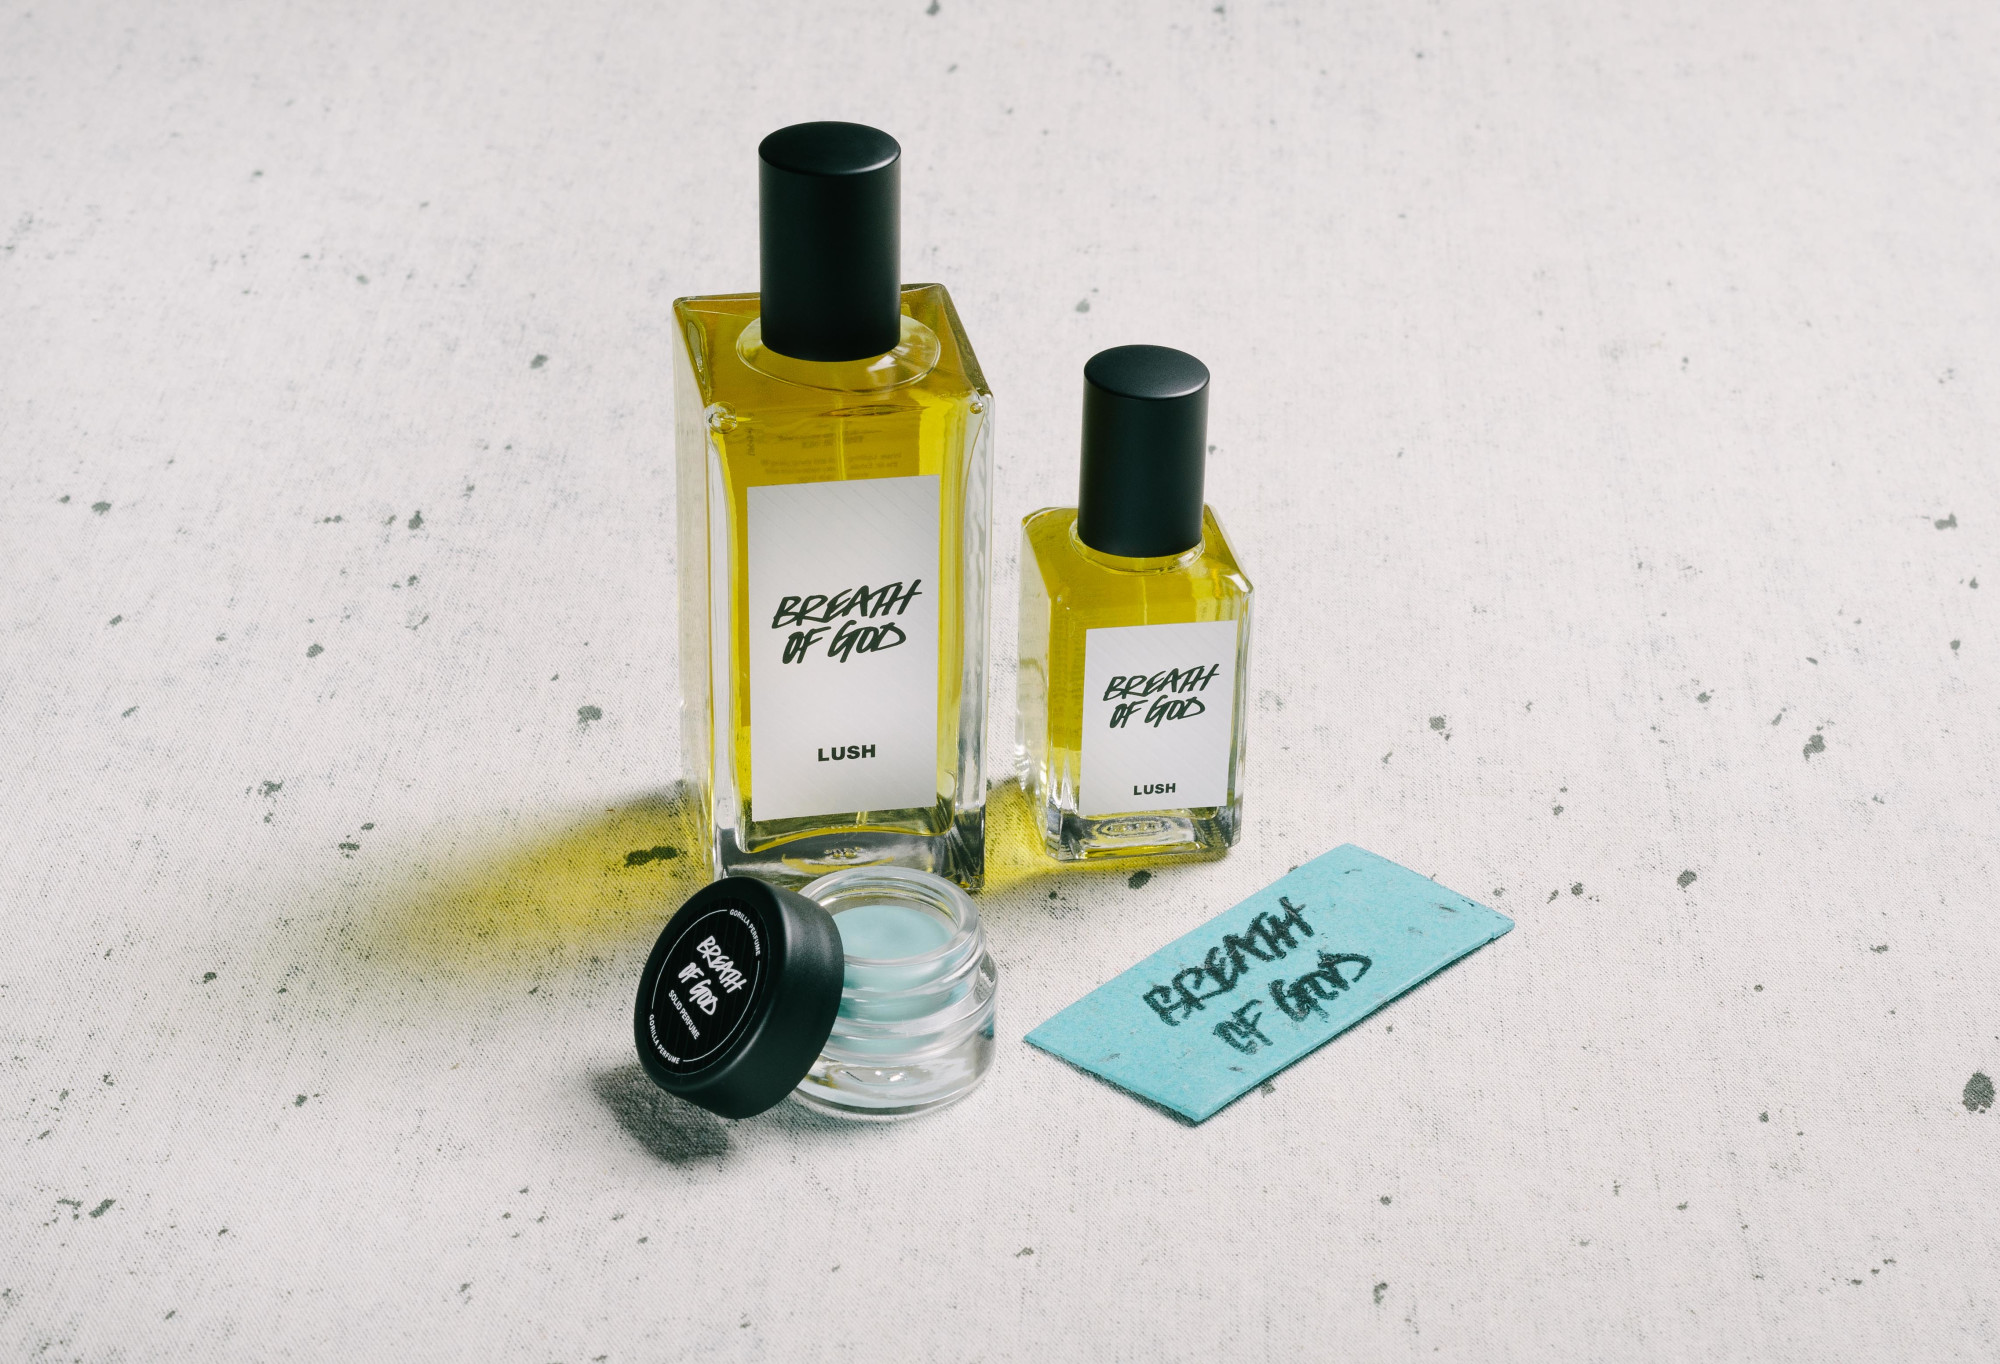 The whole Breath of God fragrance collection is displayed on a white surface, flecked with grey.